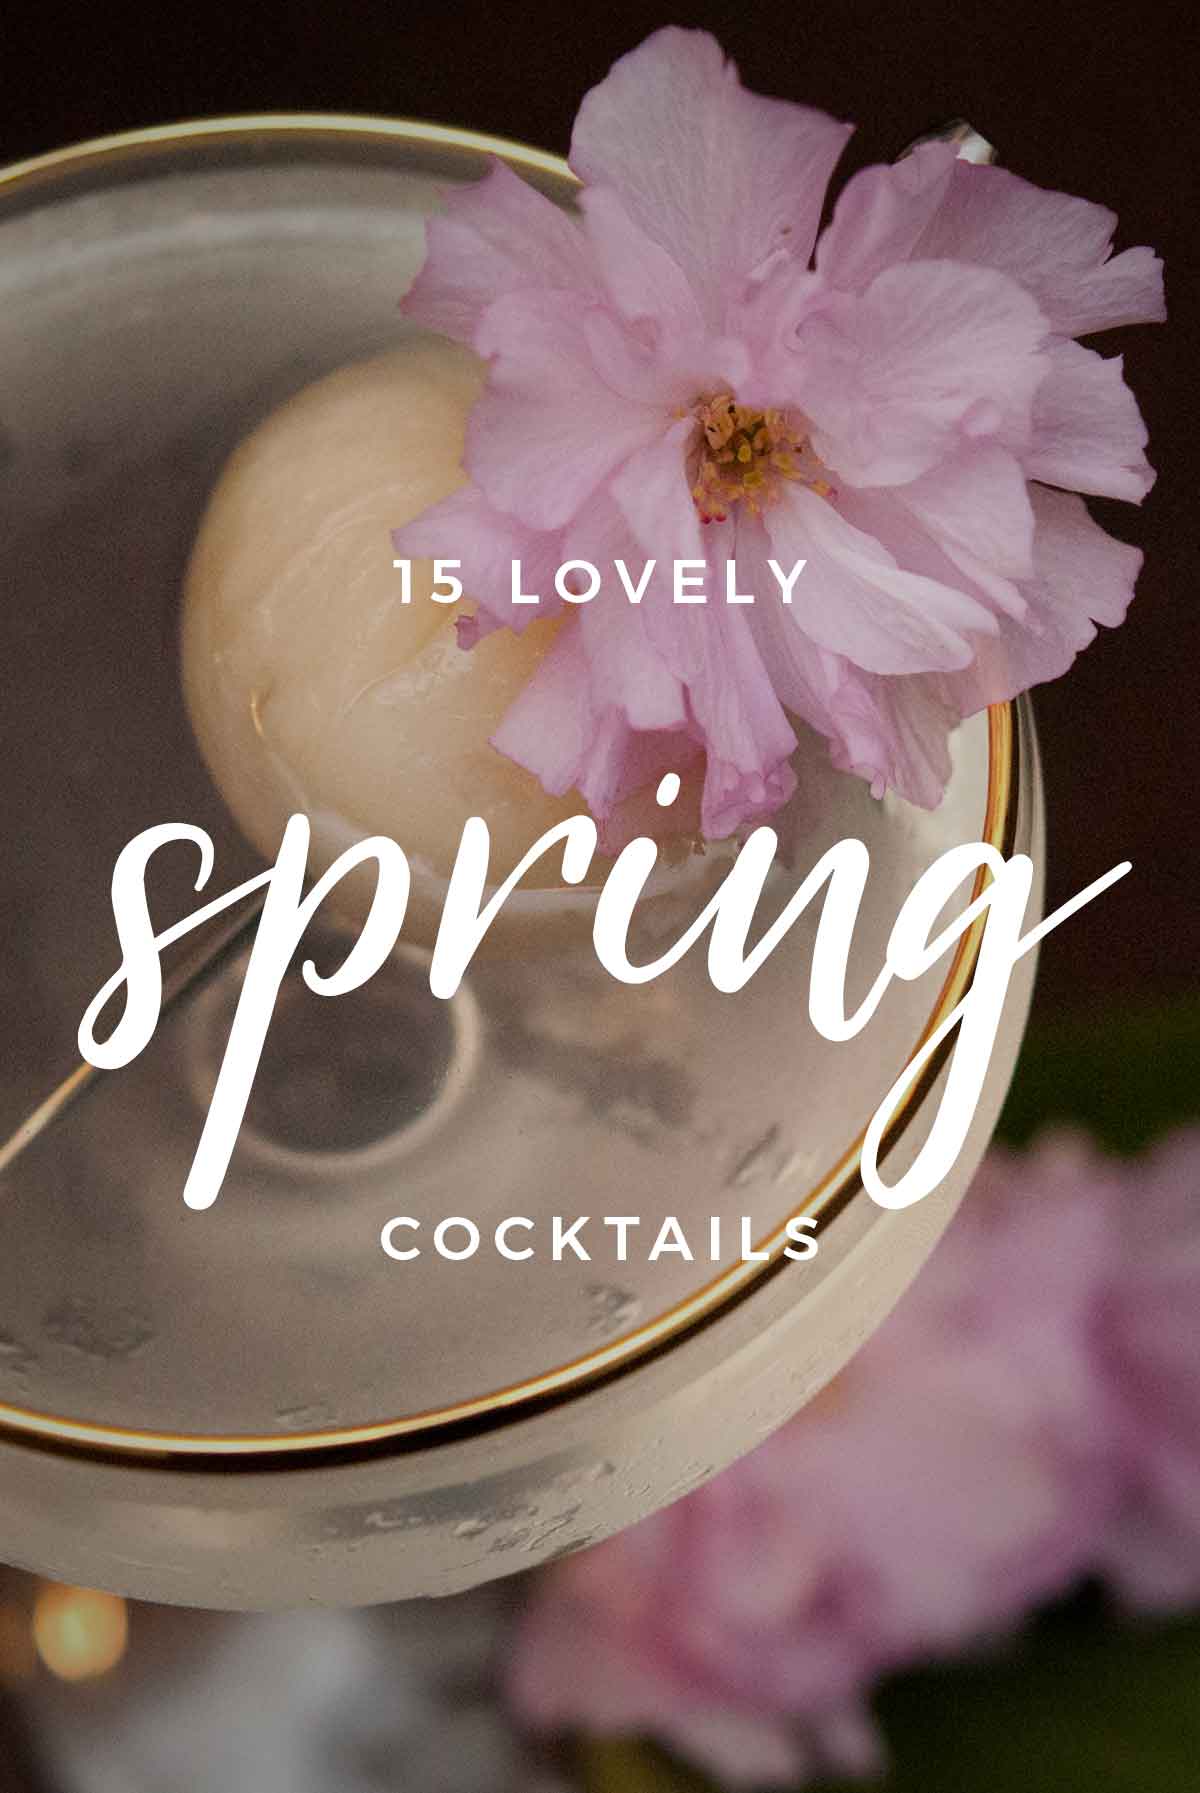 A floral cocktail garnish with a title that says "15 Lovely Spring Cocktails."